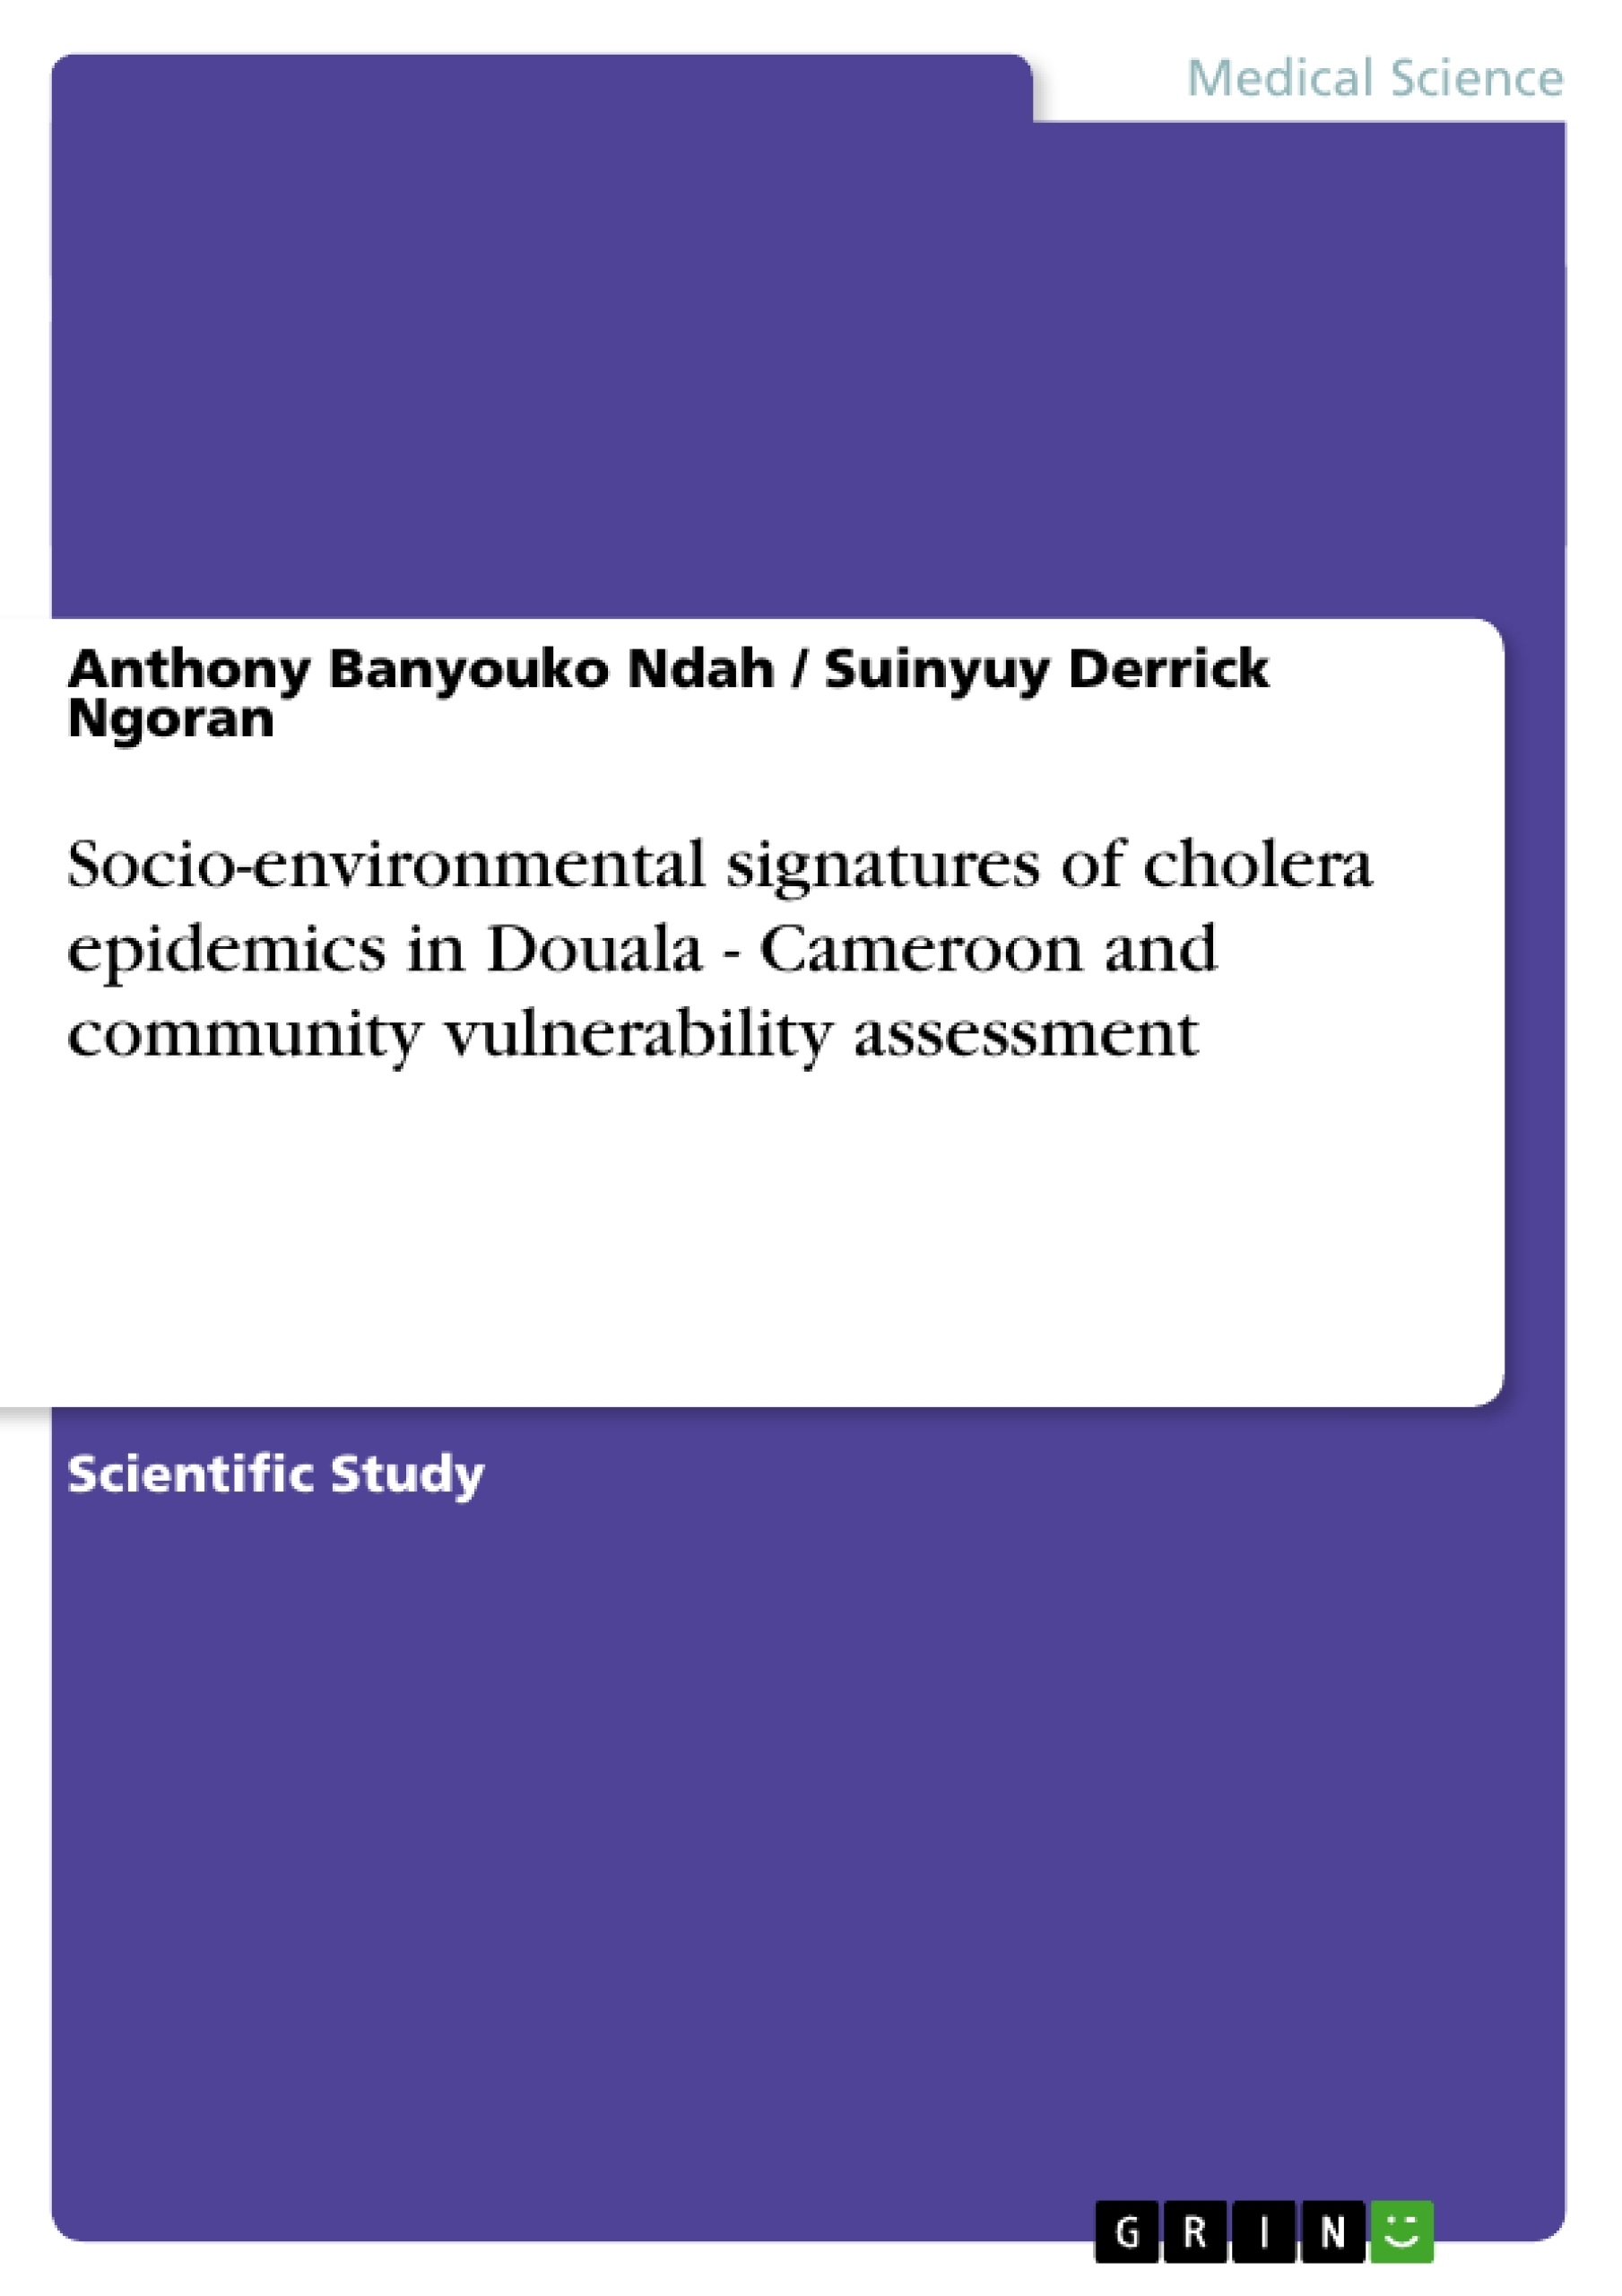 Titre: Socio-environmental signatures of cholera epidemics in Douala - Cameroon and community vulnerability assessment